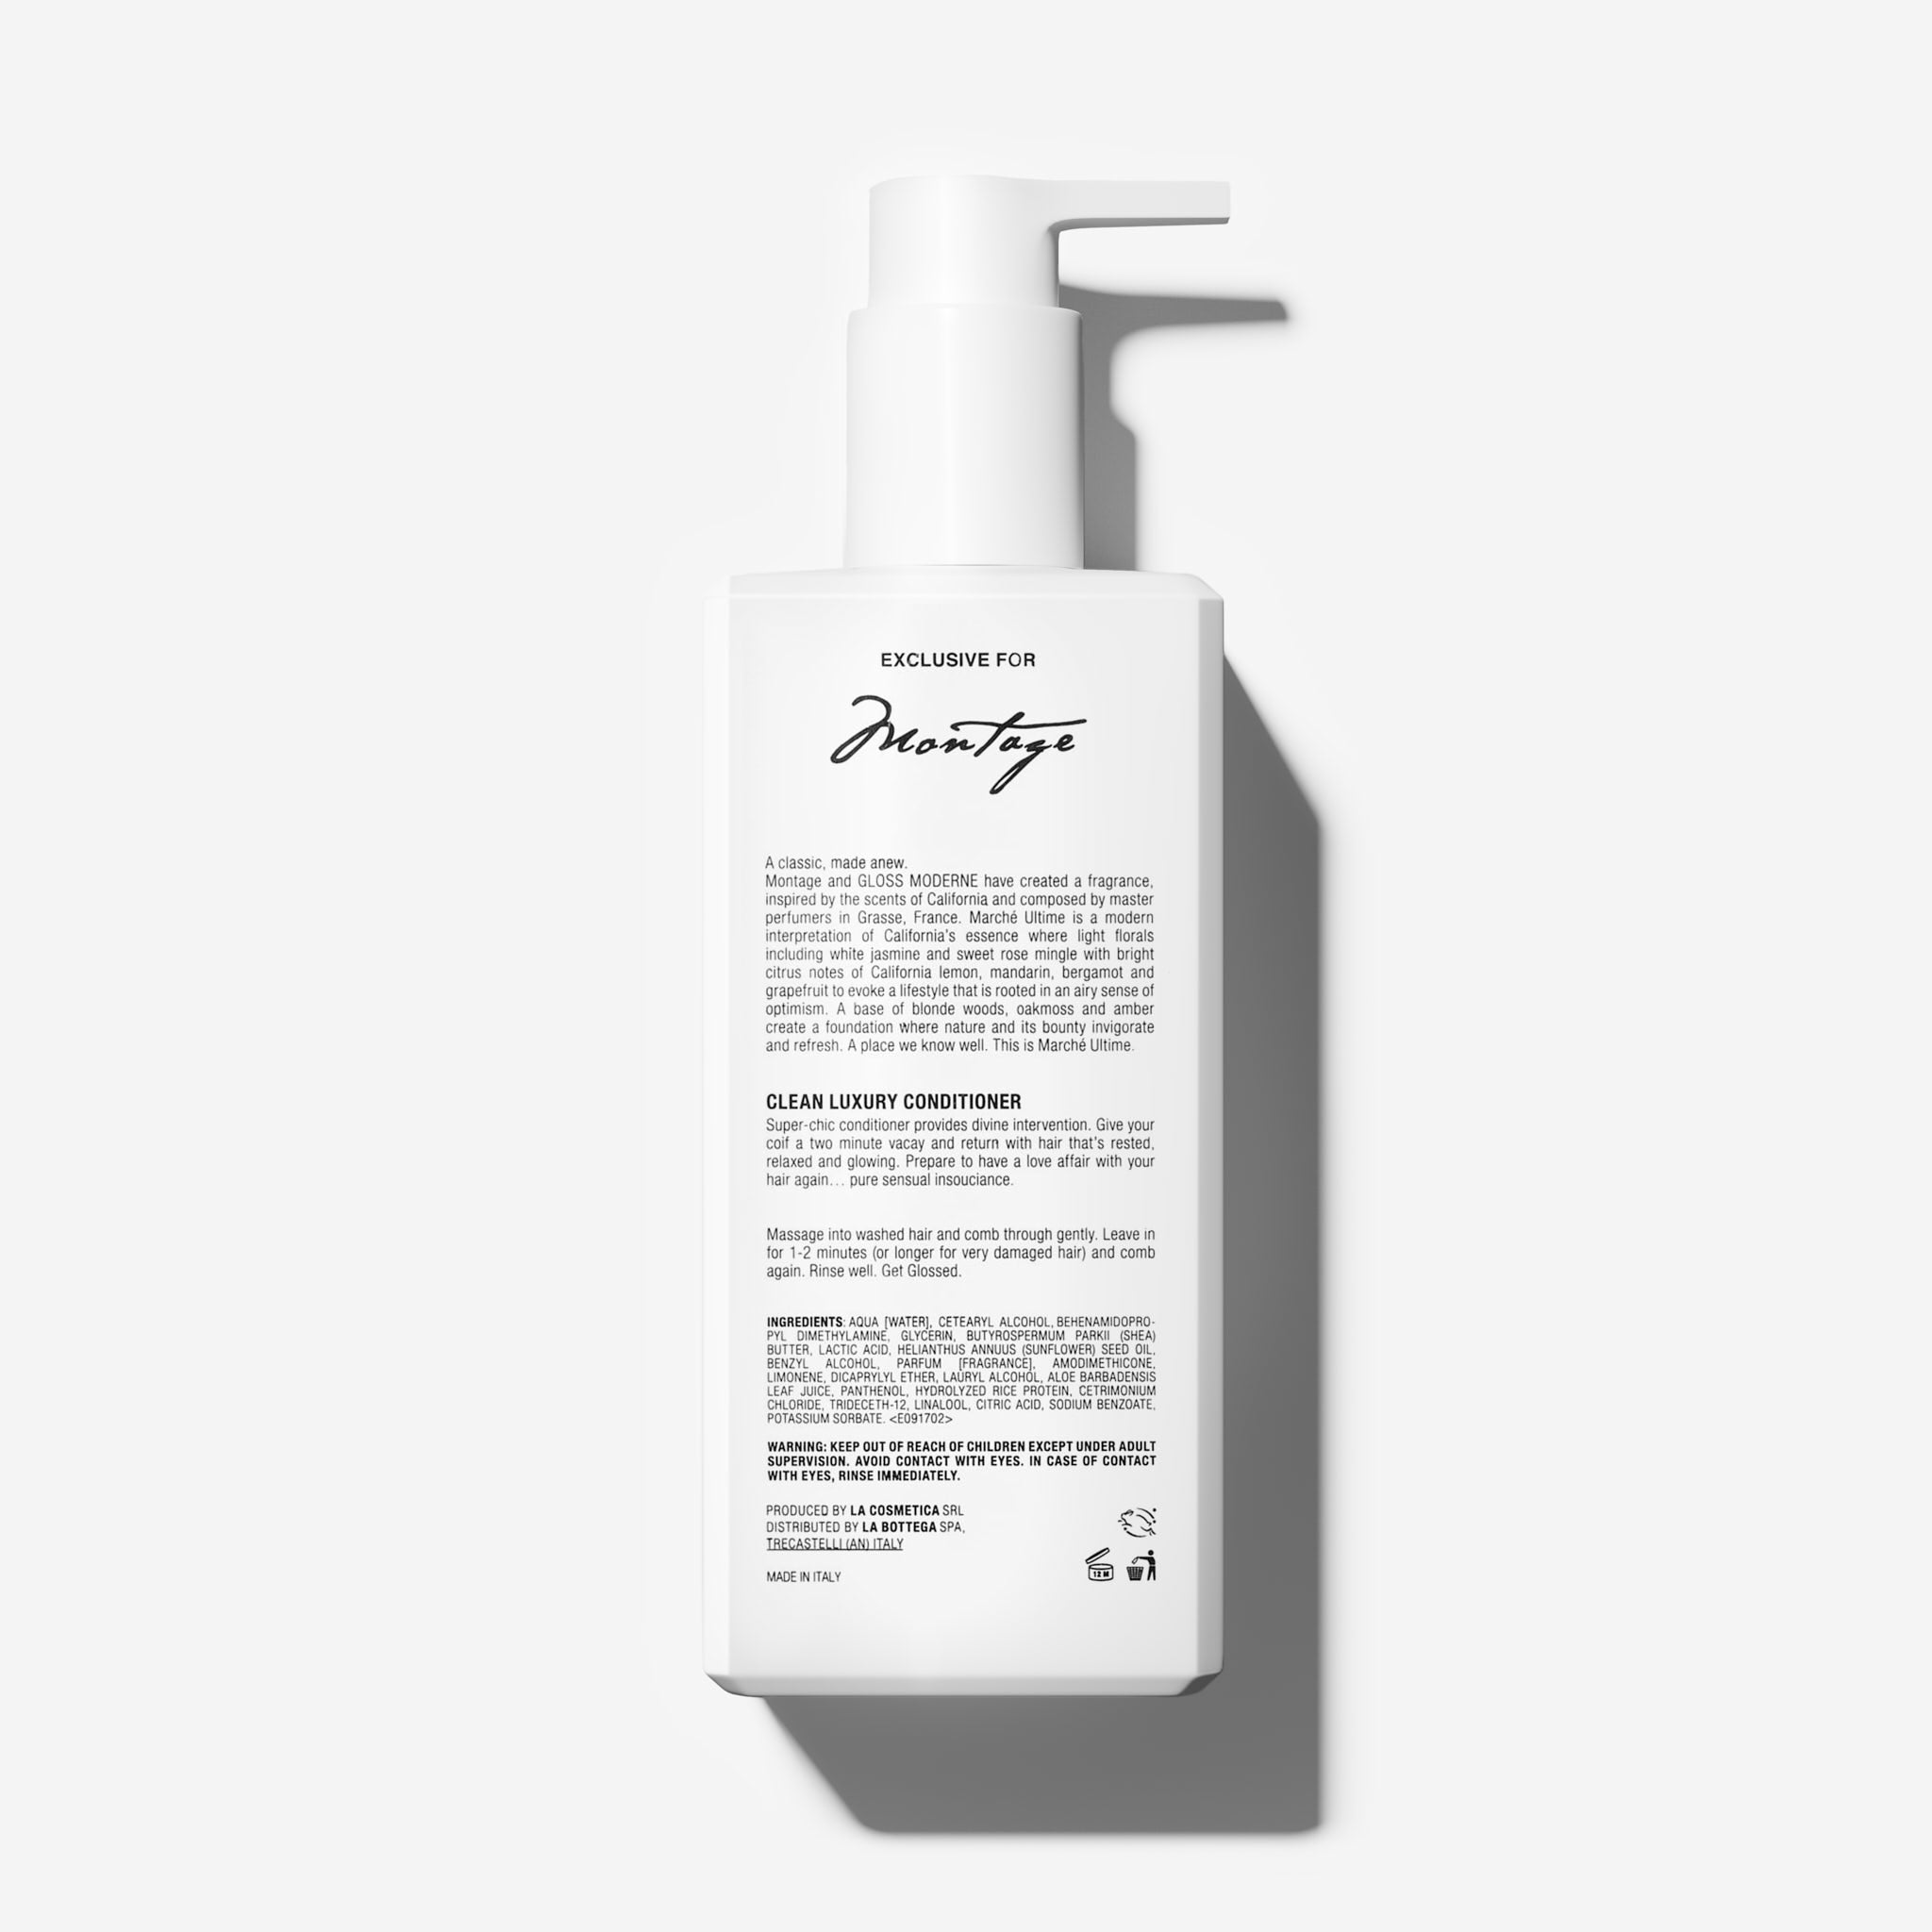 Clean Luxury Conditioner - Marche Ultime (400mL)